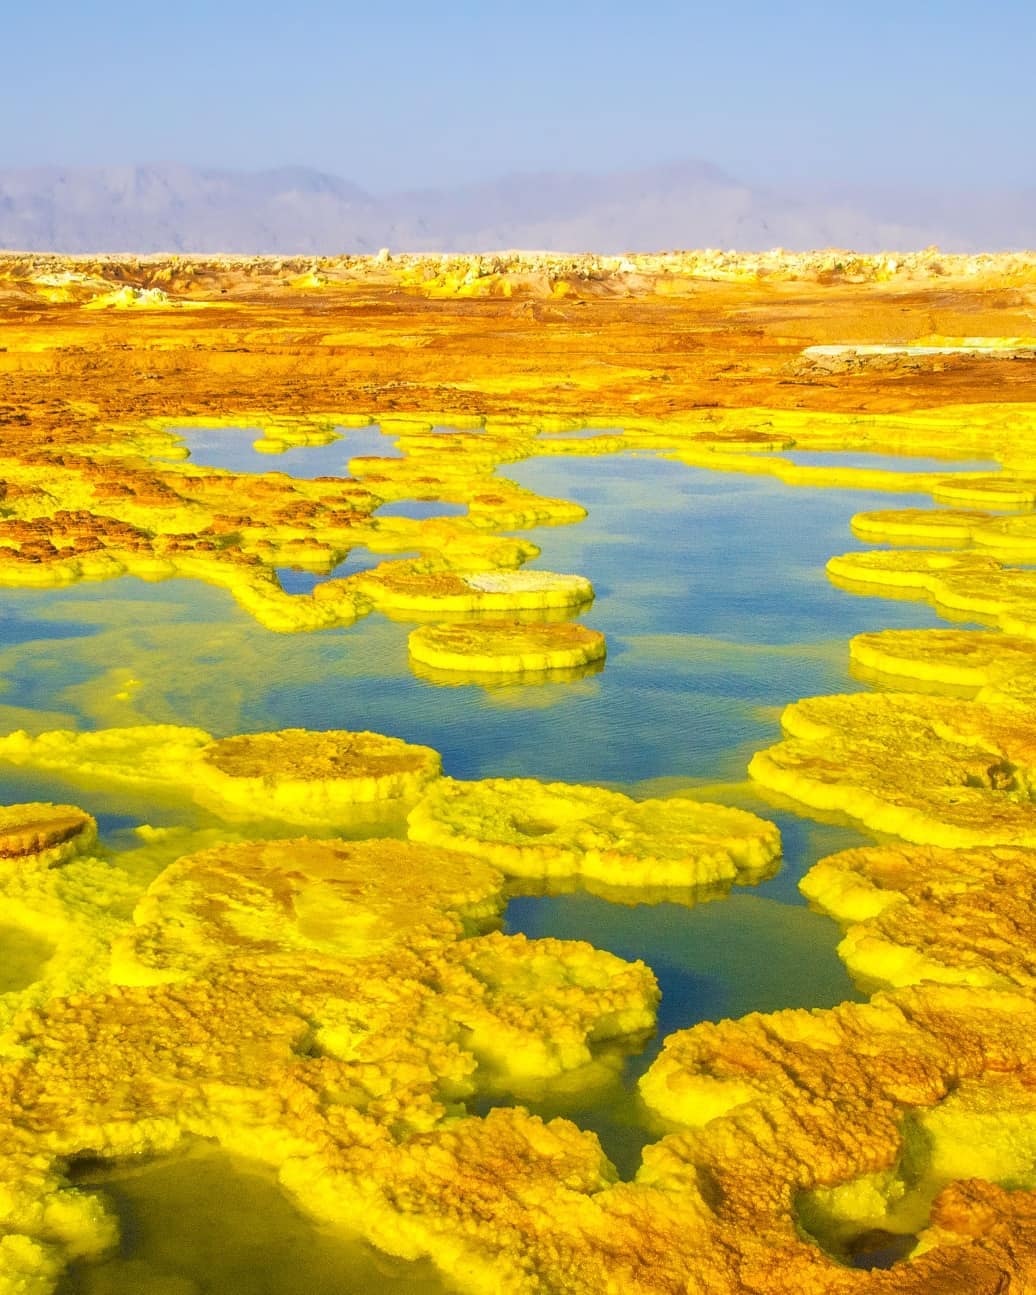 Dallol in #Ethiopia lies 116m (380ft) below sea level in the Danakil Depression and is part of the East African Rift where three continental plates are being torn apart. It's one of the weirdest landscapes we've ever seen! ⠀
⠀
It’s here in the Danakil Depression that scientists discovered Lucy, the oldest and most complete hominid ever found. Lucy has endured extensive research and testing, but here at Dallol, one scarcely needs evidence of her existence. Standing amid this mystical primordia, it feels perfectly feasible that not only death, but life itself could rise from the depths of Dallol.⠀
-⠀
-⠀
-⠀
-⠀
-⠀
-⠀
-⠀
#Dallol #Danakil #DanakilDepression #Afar #AfarRegion #adventurethatislife #liveoutdoors #awesomepix #ourlonelyplanet #travelawesome #passionpassport #danikaldesert #colorfulhotspring #hottestplace #hottestplaceonearth #extemeheat #travelawesome #optoutside #earthpix #neverstopexploring #keepitwild #thegreatoutdoors #lppathfinders